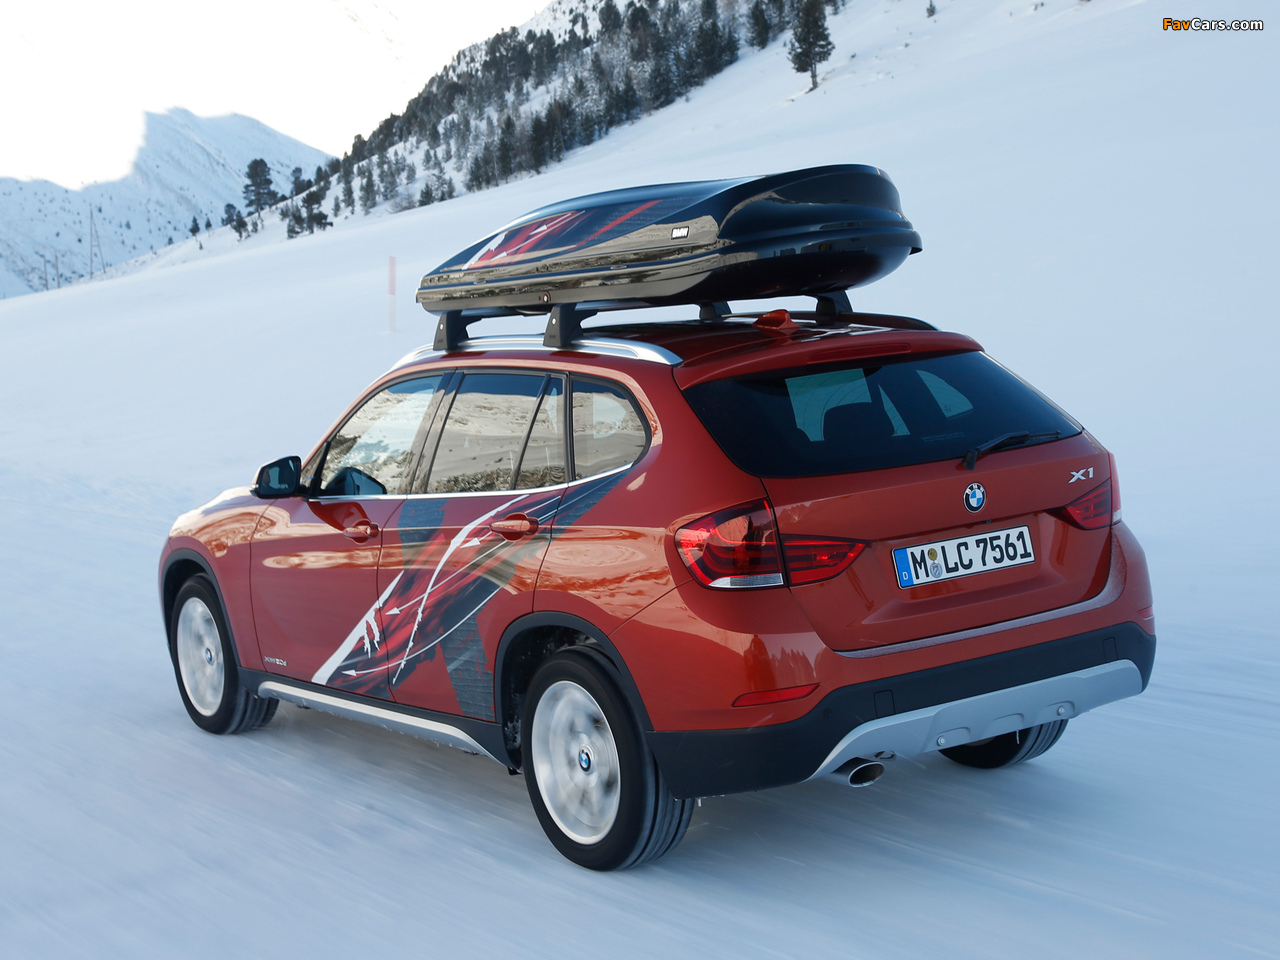 BMW X1 Powder Ride Edition (E84) 2012 pictures (1280 x 960)